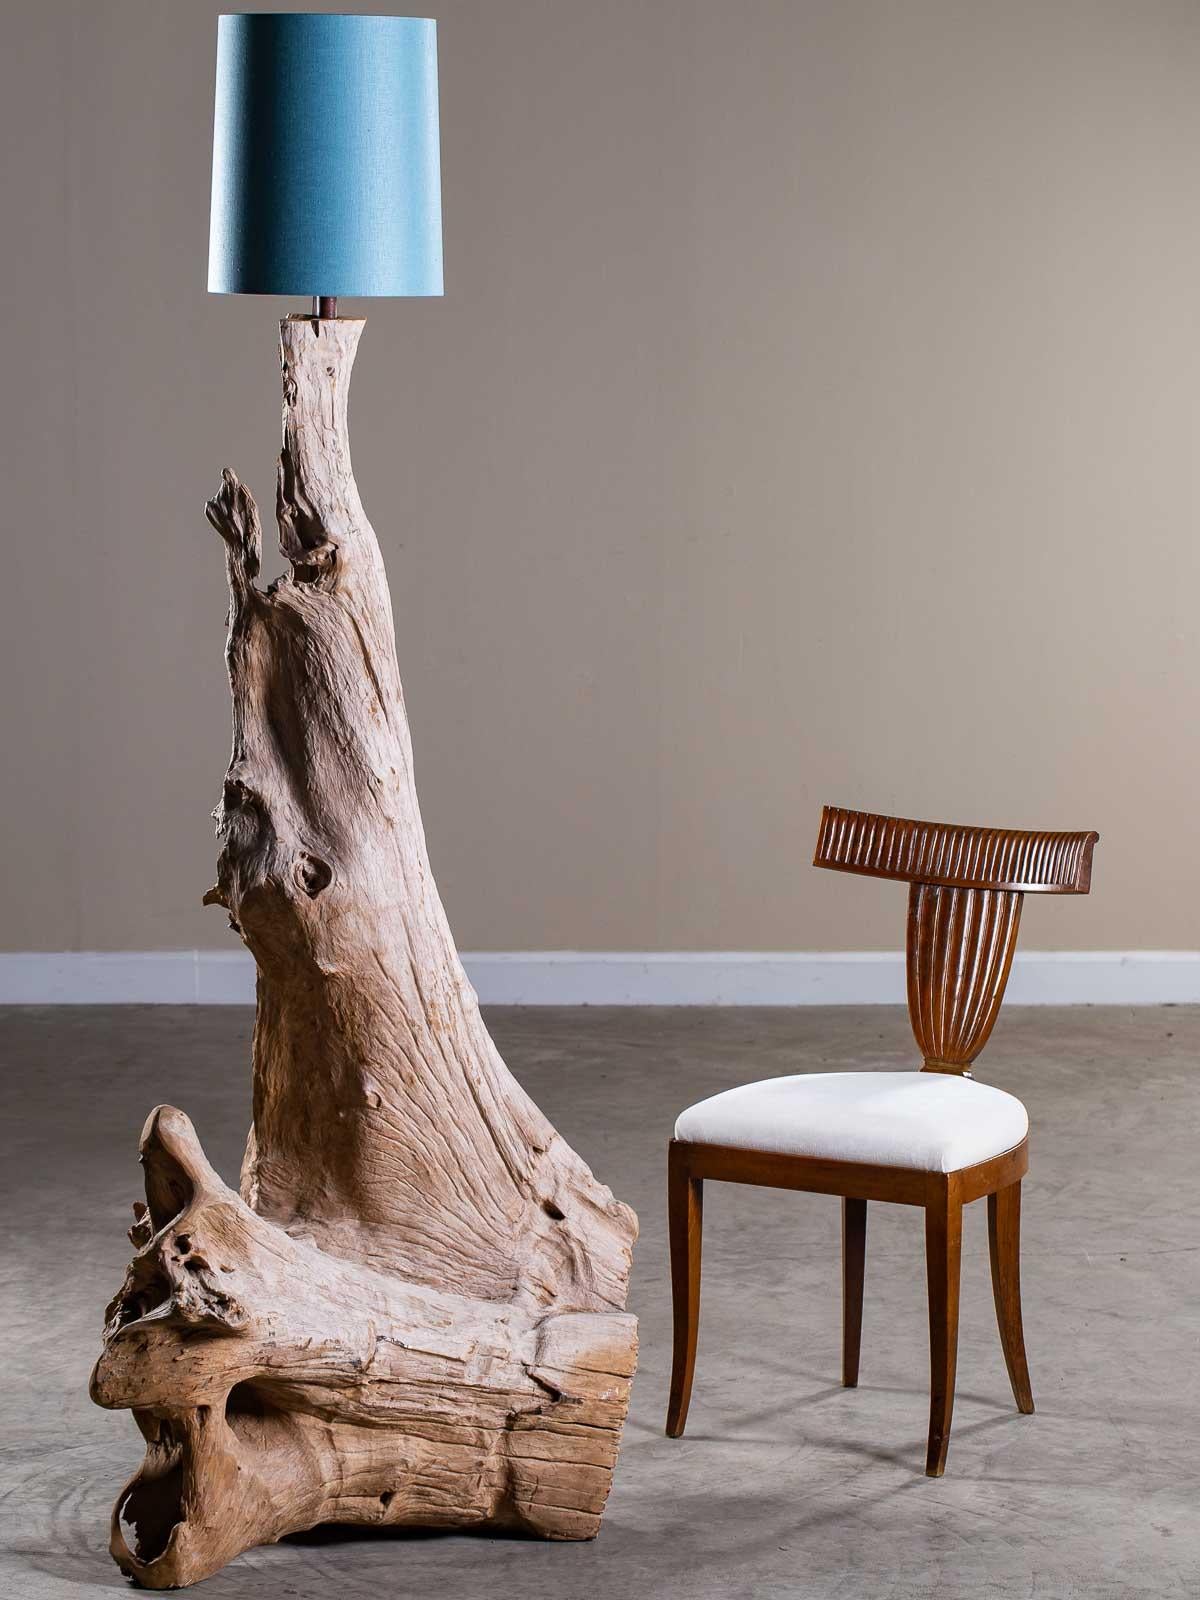 Incredible organic modern driftwood floor lamp crafted entirely by nature. Harvested from the shores of Southeast Asia this one of a kind floor lamp exhibits all the natural signs of having been tumbled in the ocean. The play of light and dark